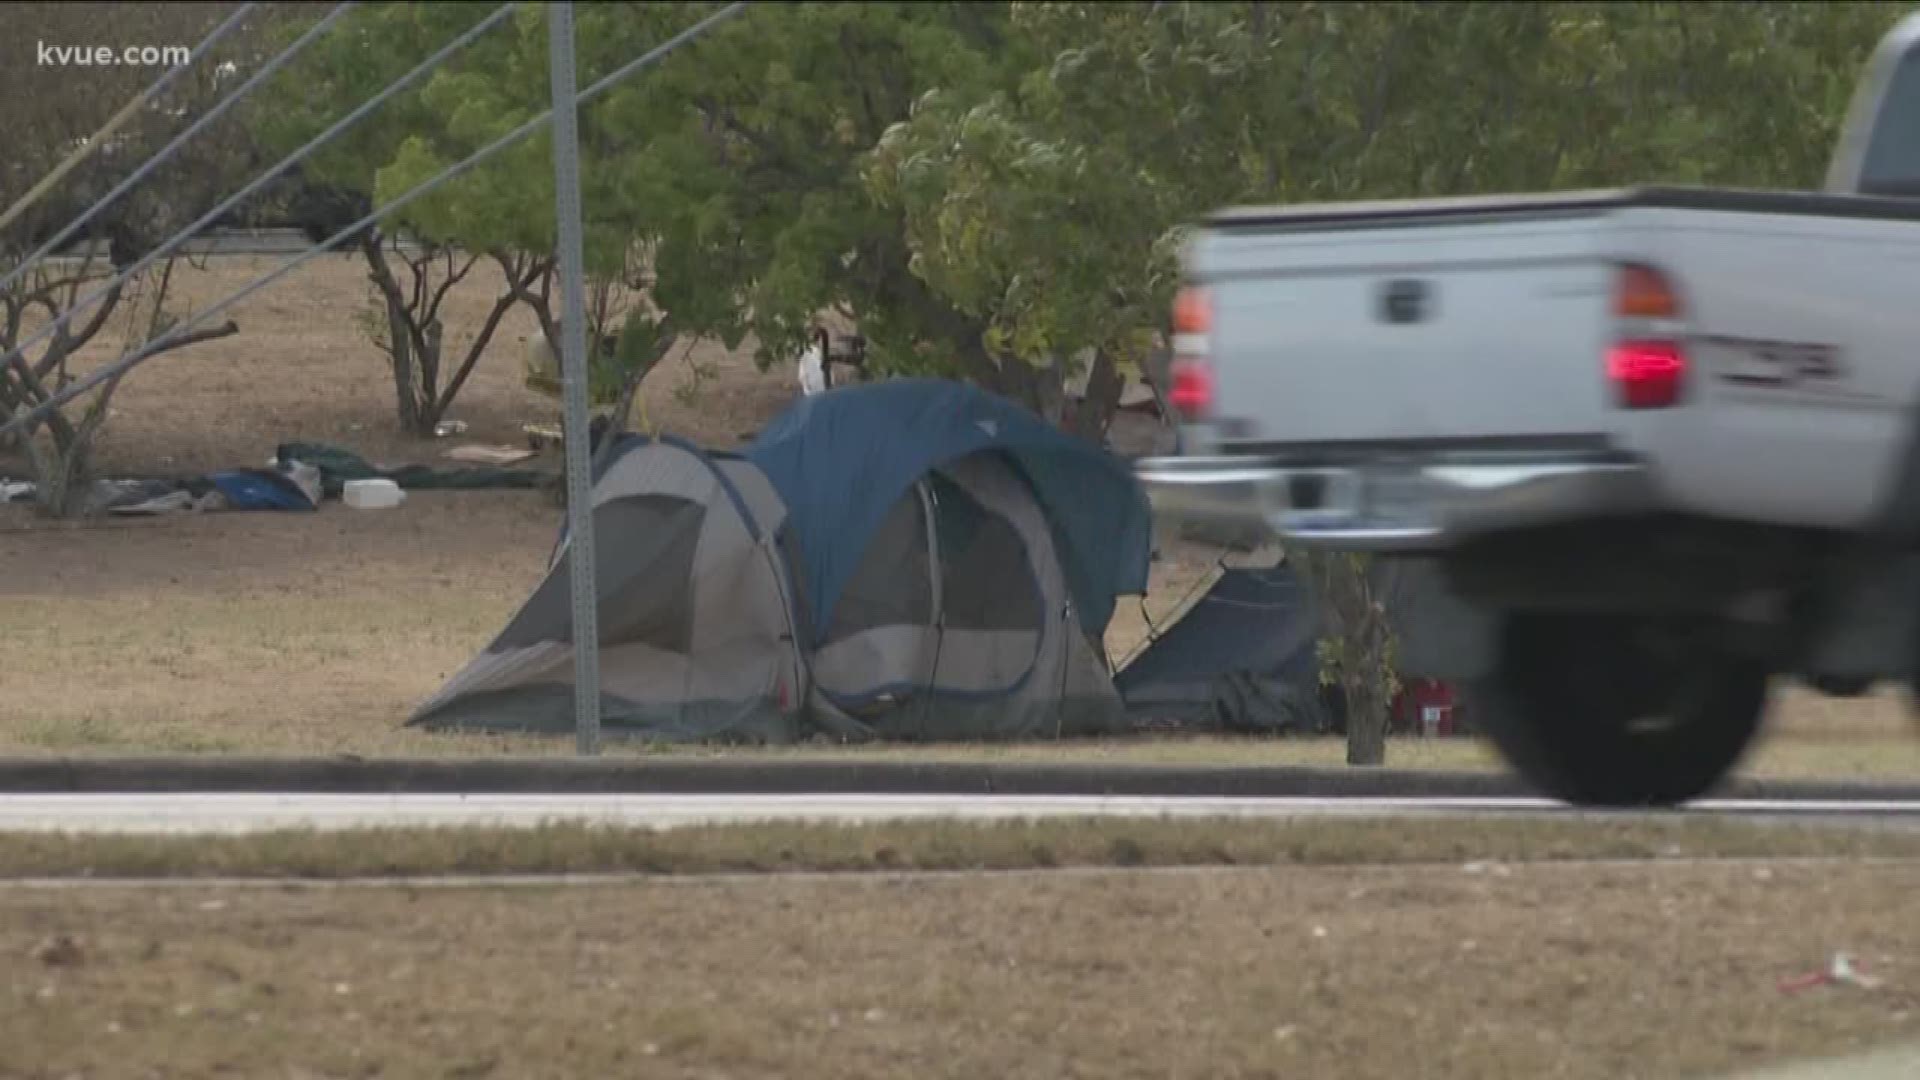 According to police, someone living in one of the tents is a known drug dealer.